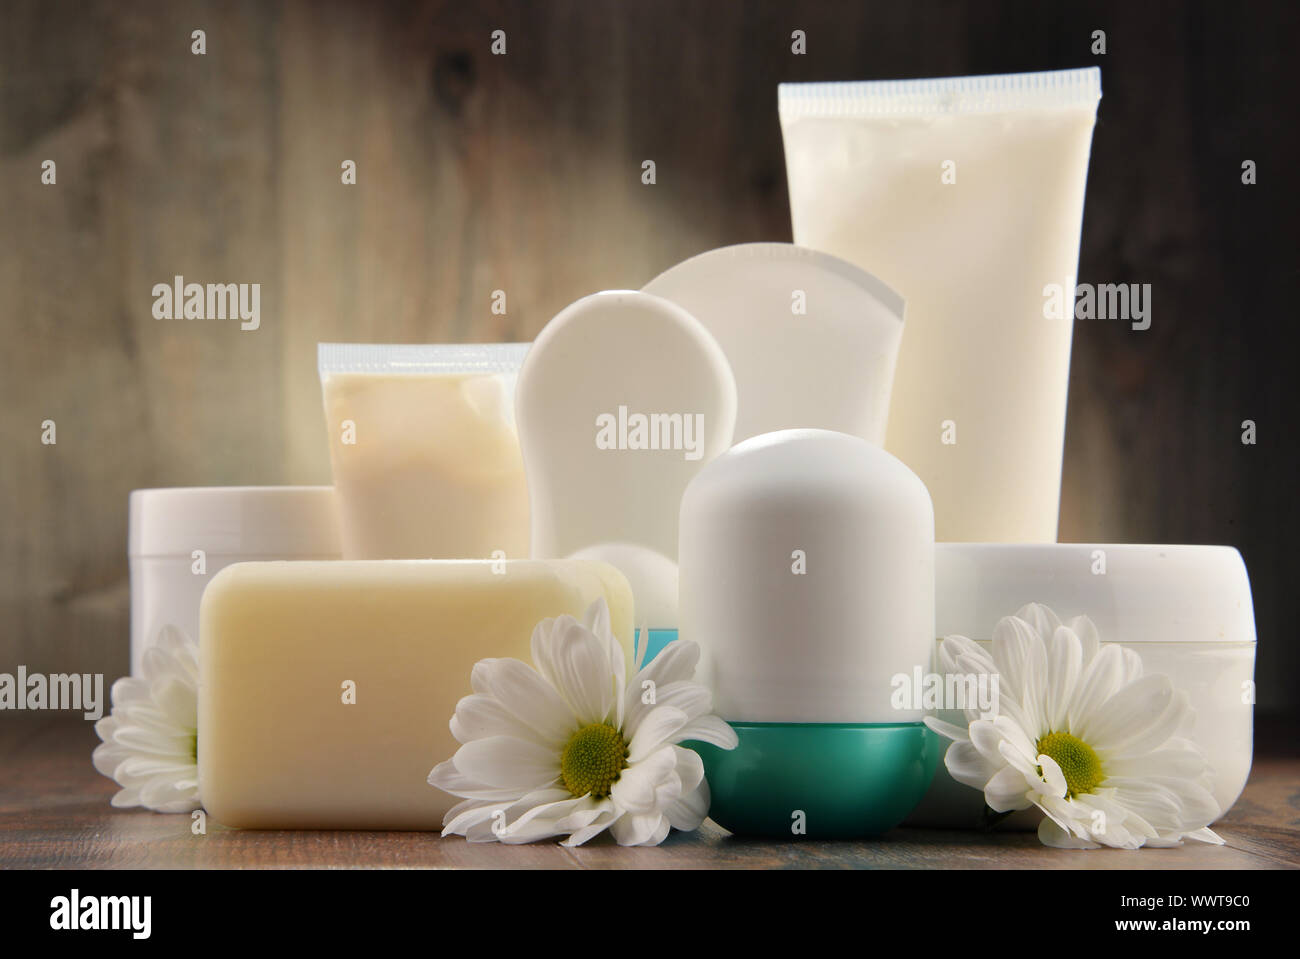 Composition with containers of body care and beauty products. Eco cosmetics. Stock Photo